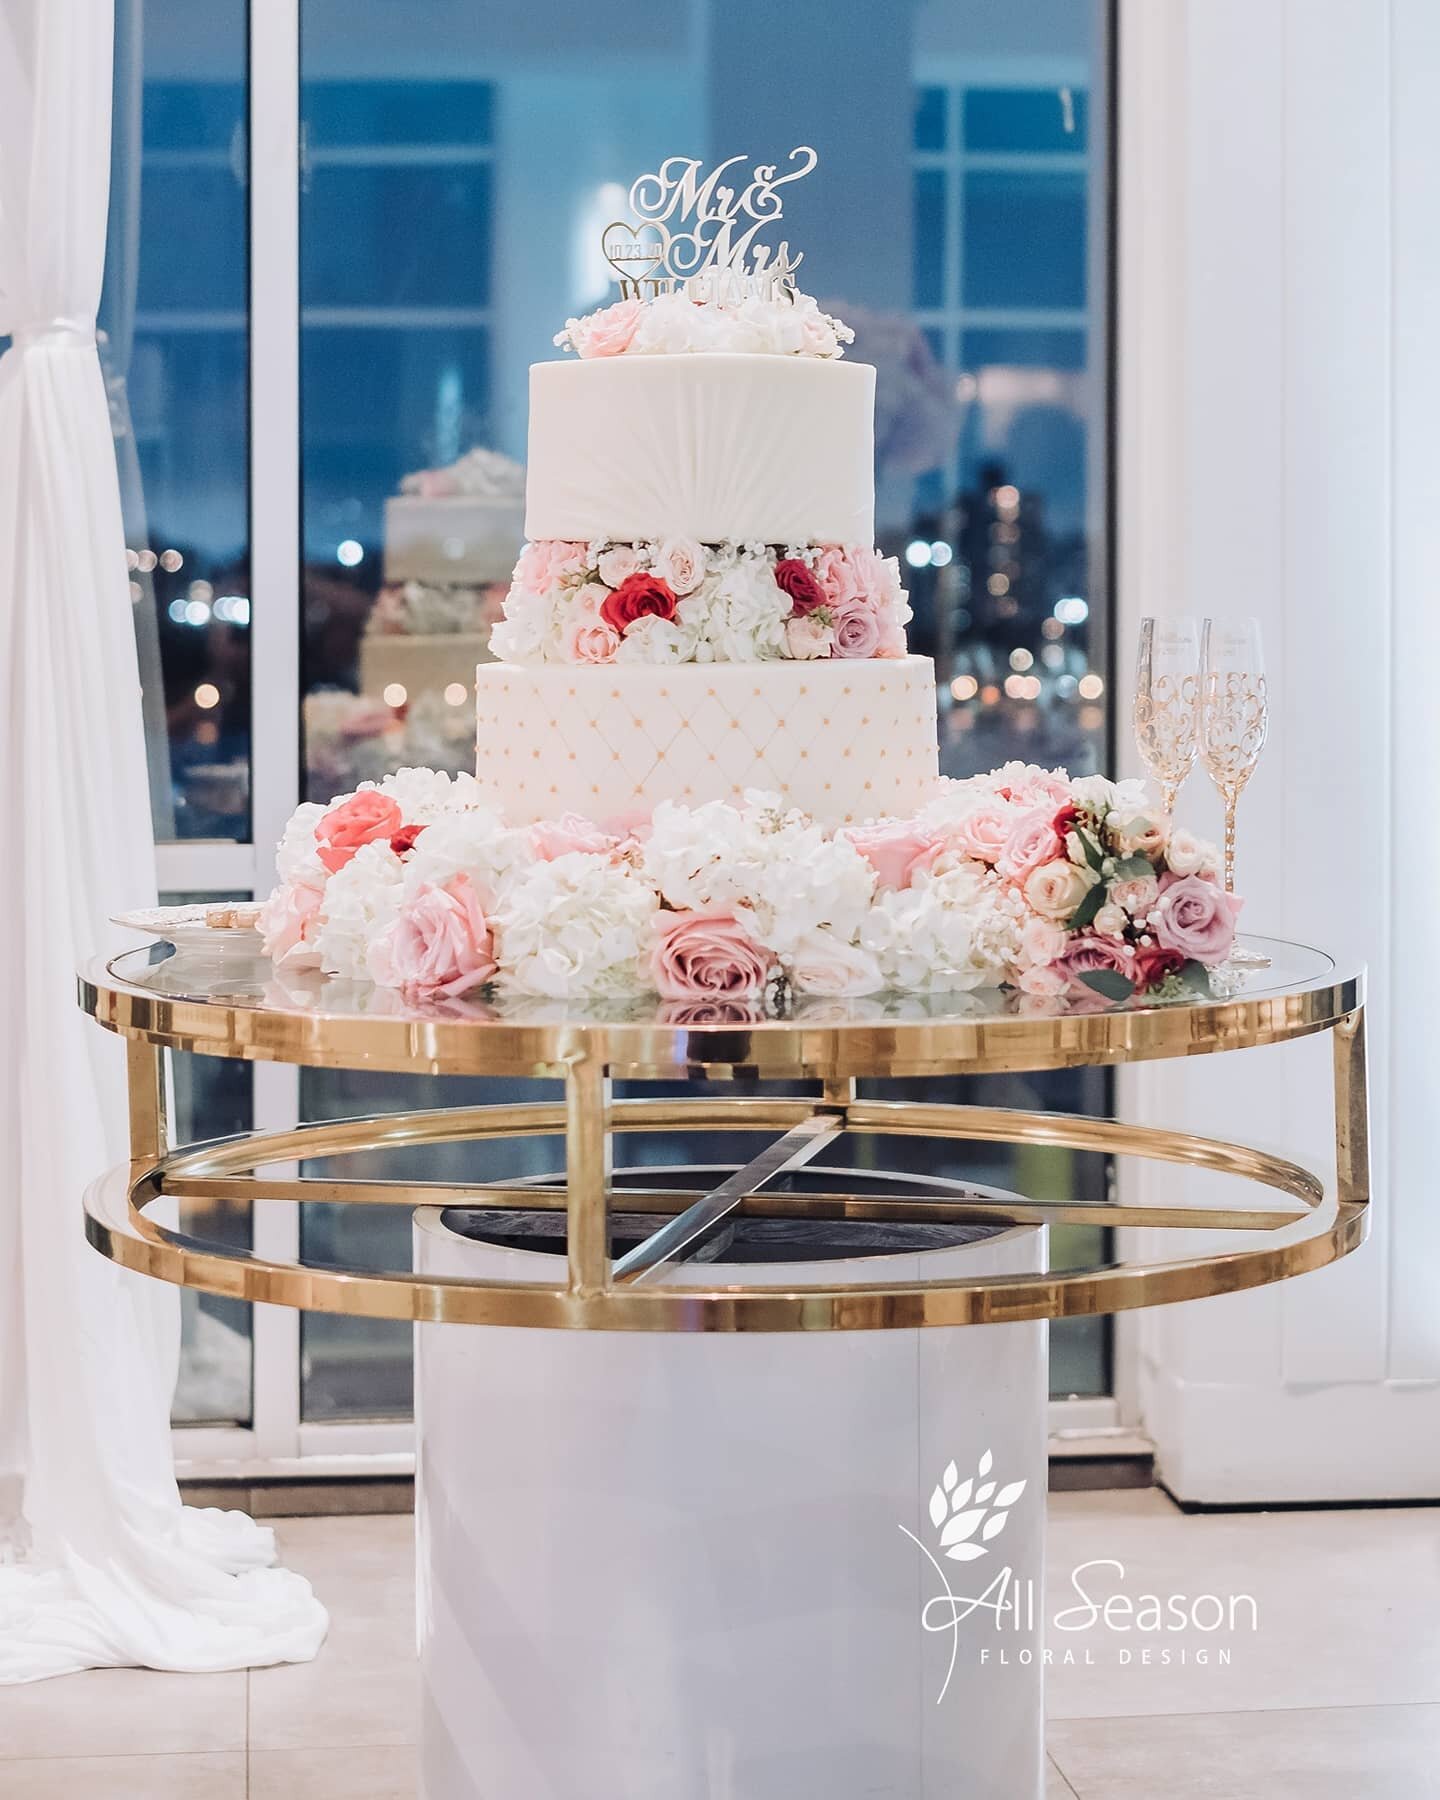 There are many ways to decorate a wedding cake 🍰, of course, our favourite is with fresh flowers 🌹🌷🌸

Cake : @docs_cake_shop
Venue : @thewloft
Planner : Shirley @genesiswedding 

.
.
.
.
.

#cakeartist #weddingcake #cakedecor #weddingcakedecor #f